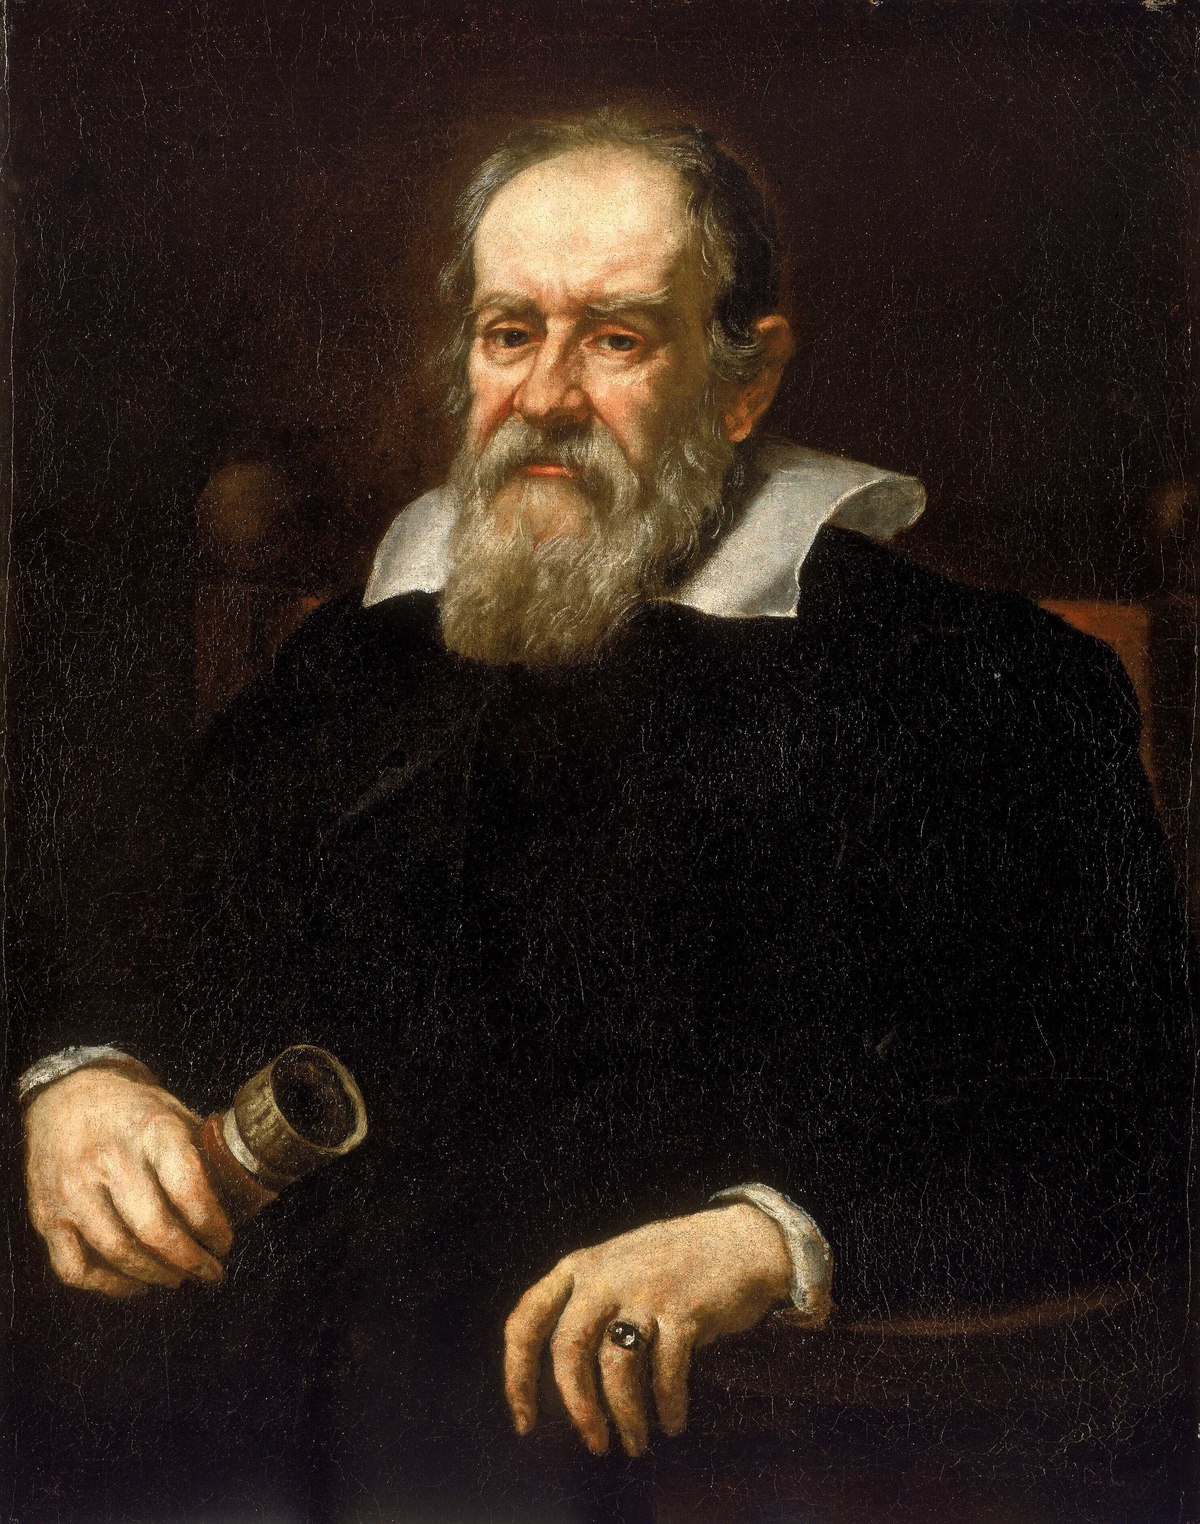 that Galileo wasn’t vindicated by the Church until 1992